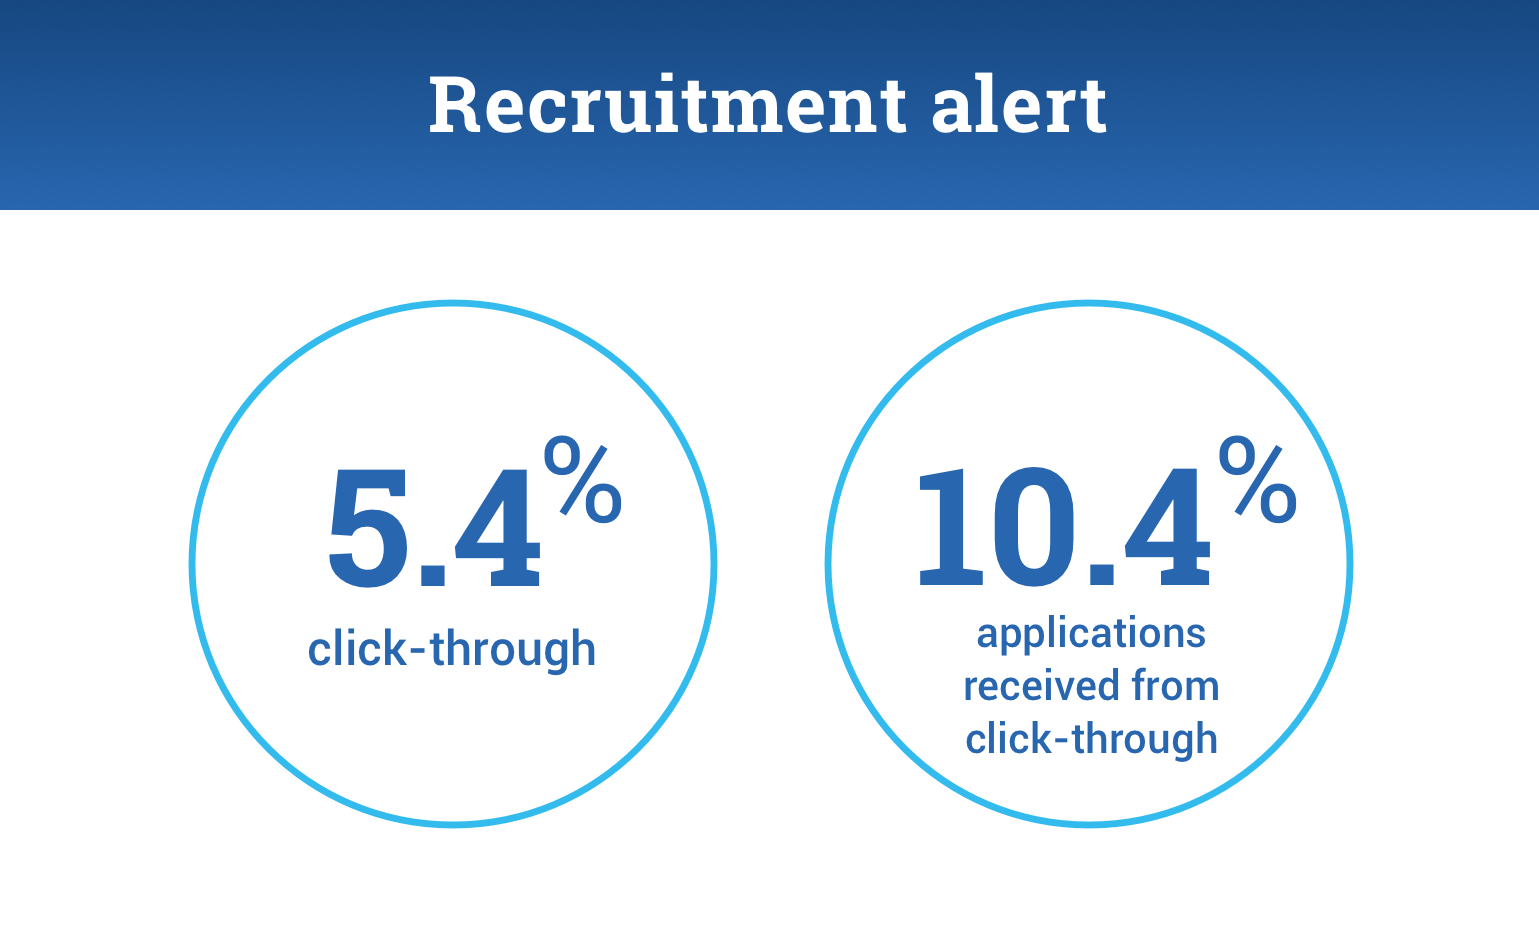 An infographics showing the results when using SMS for recruitment and hiring:

5.4% click-through.
10.4% applications received from click-through.